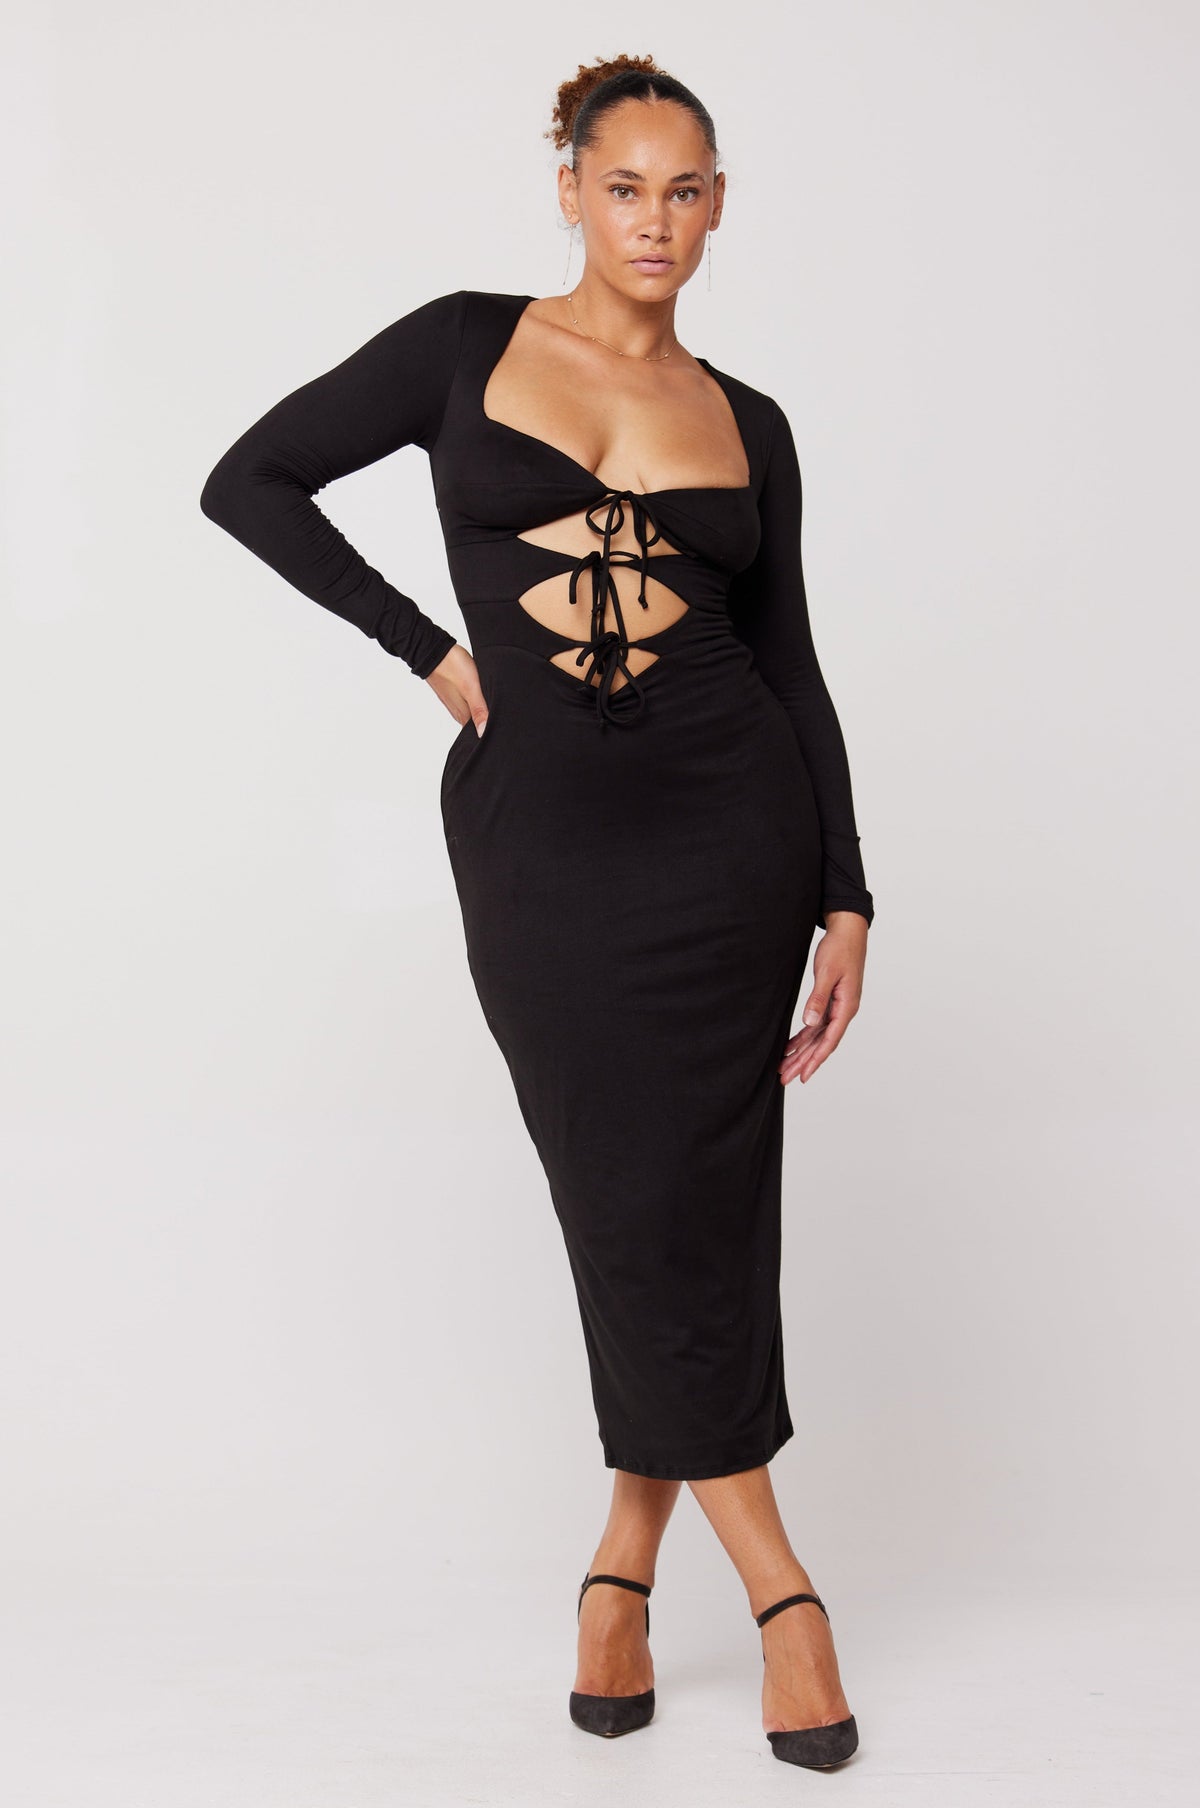 This is an image of Simone Dress in Black - RESA featuring a model wearing the dress